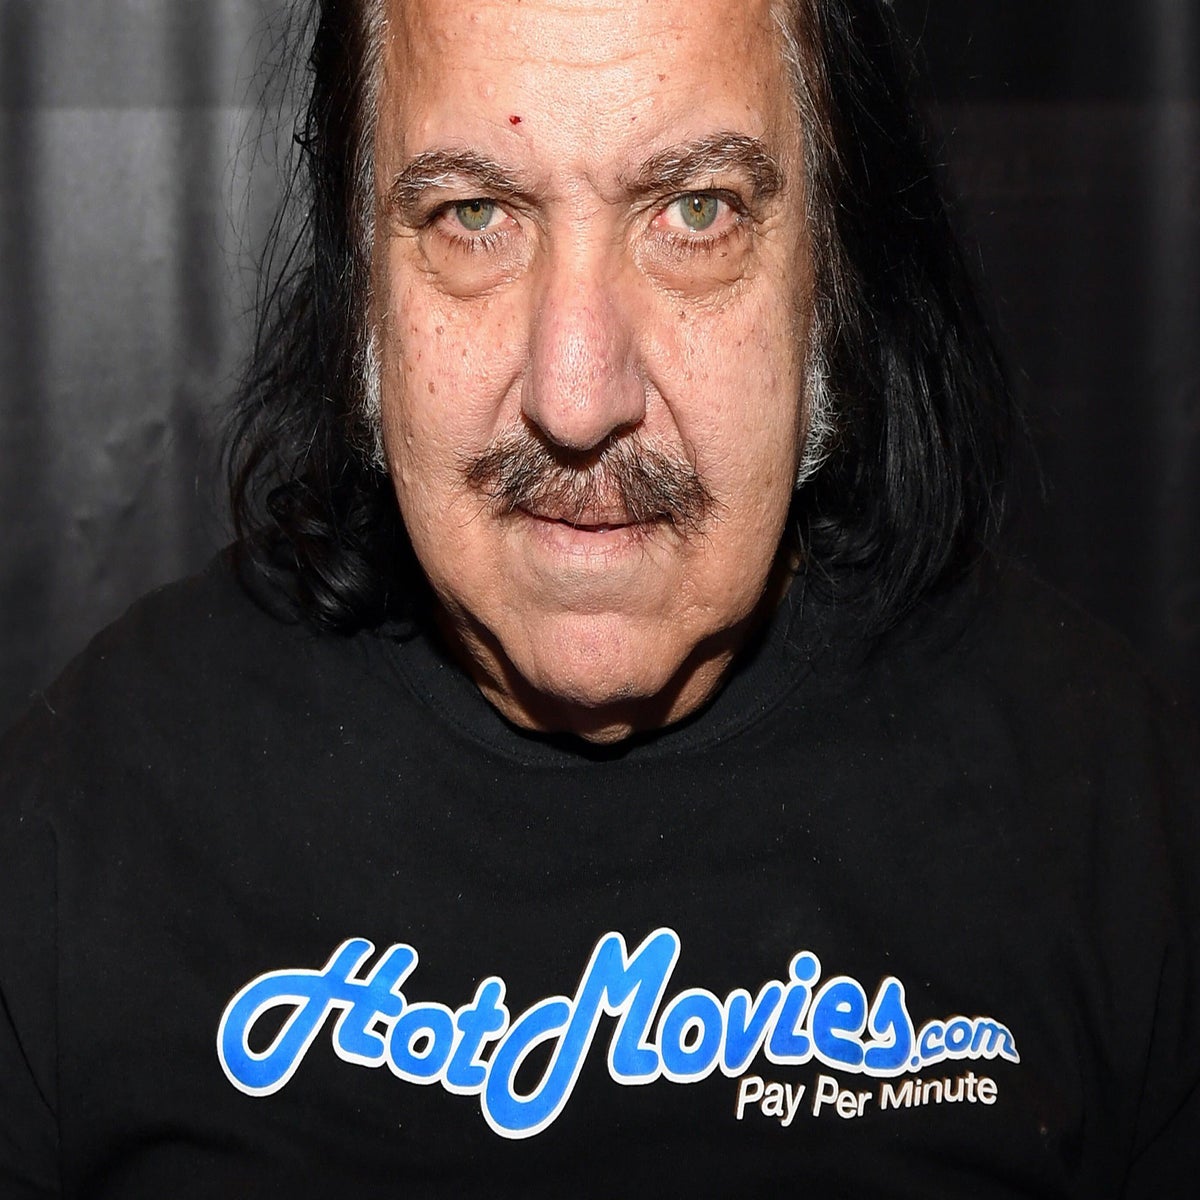 Hoolirl Rpe Ex - Ron Jeremy is 'monster' who struggled to separate porn from reality,  victims claim | The Independent